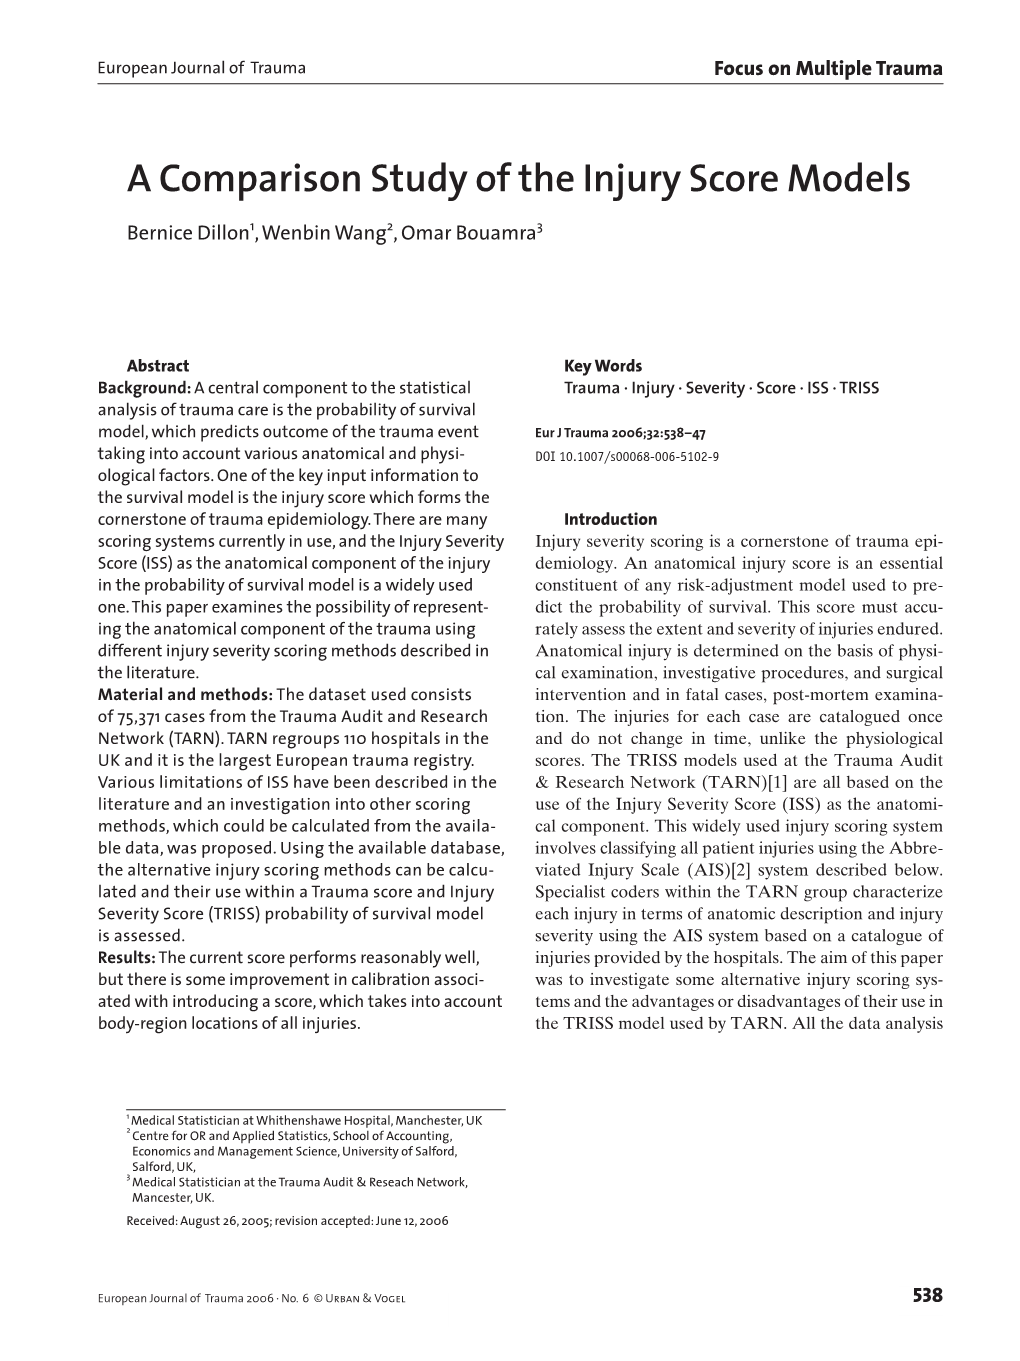 A Comparison Study of the Injury Score Models